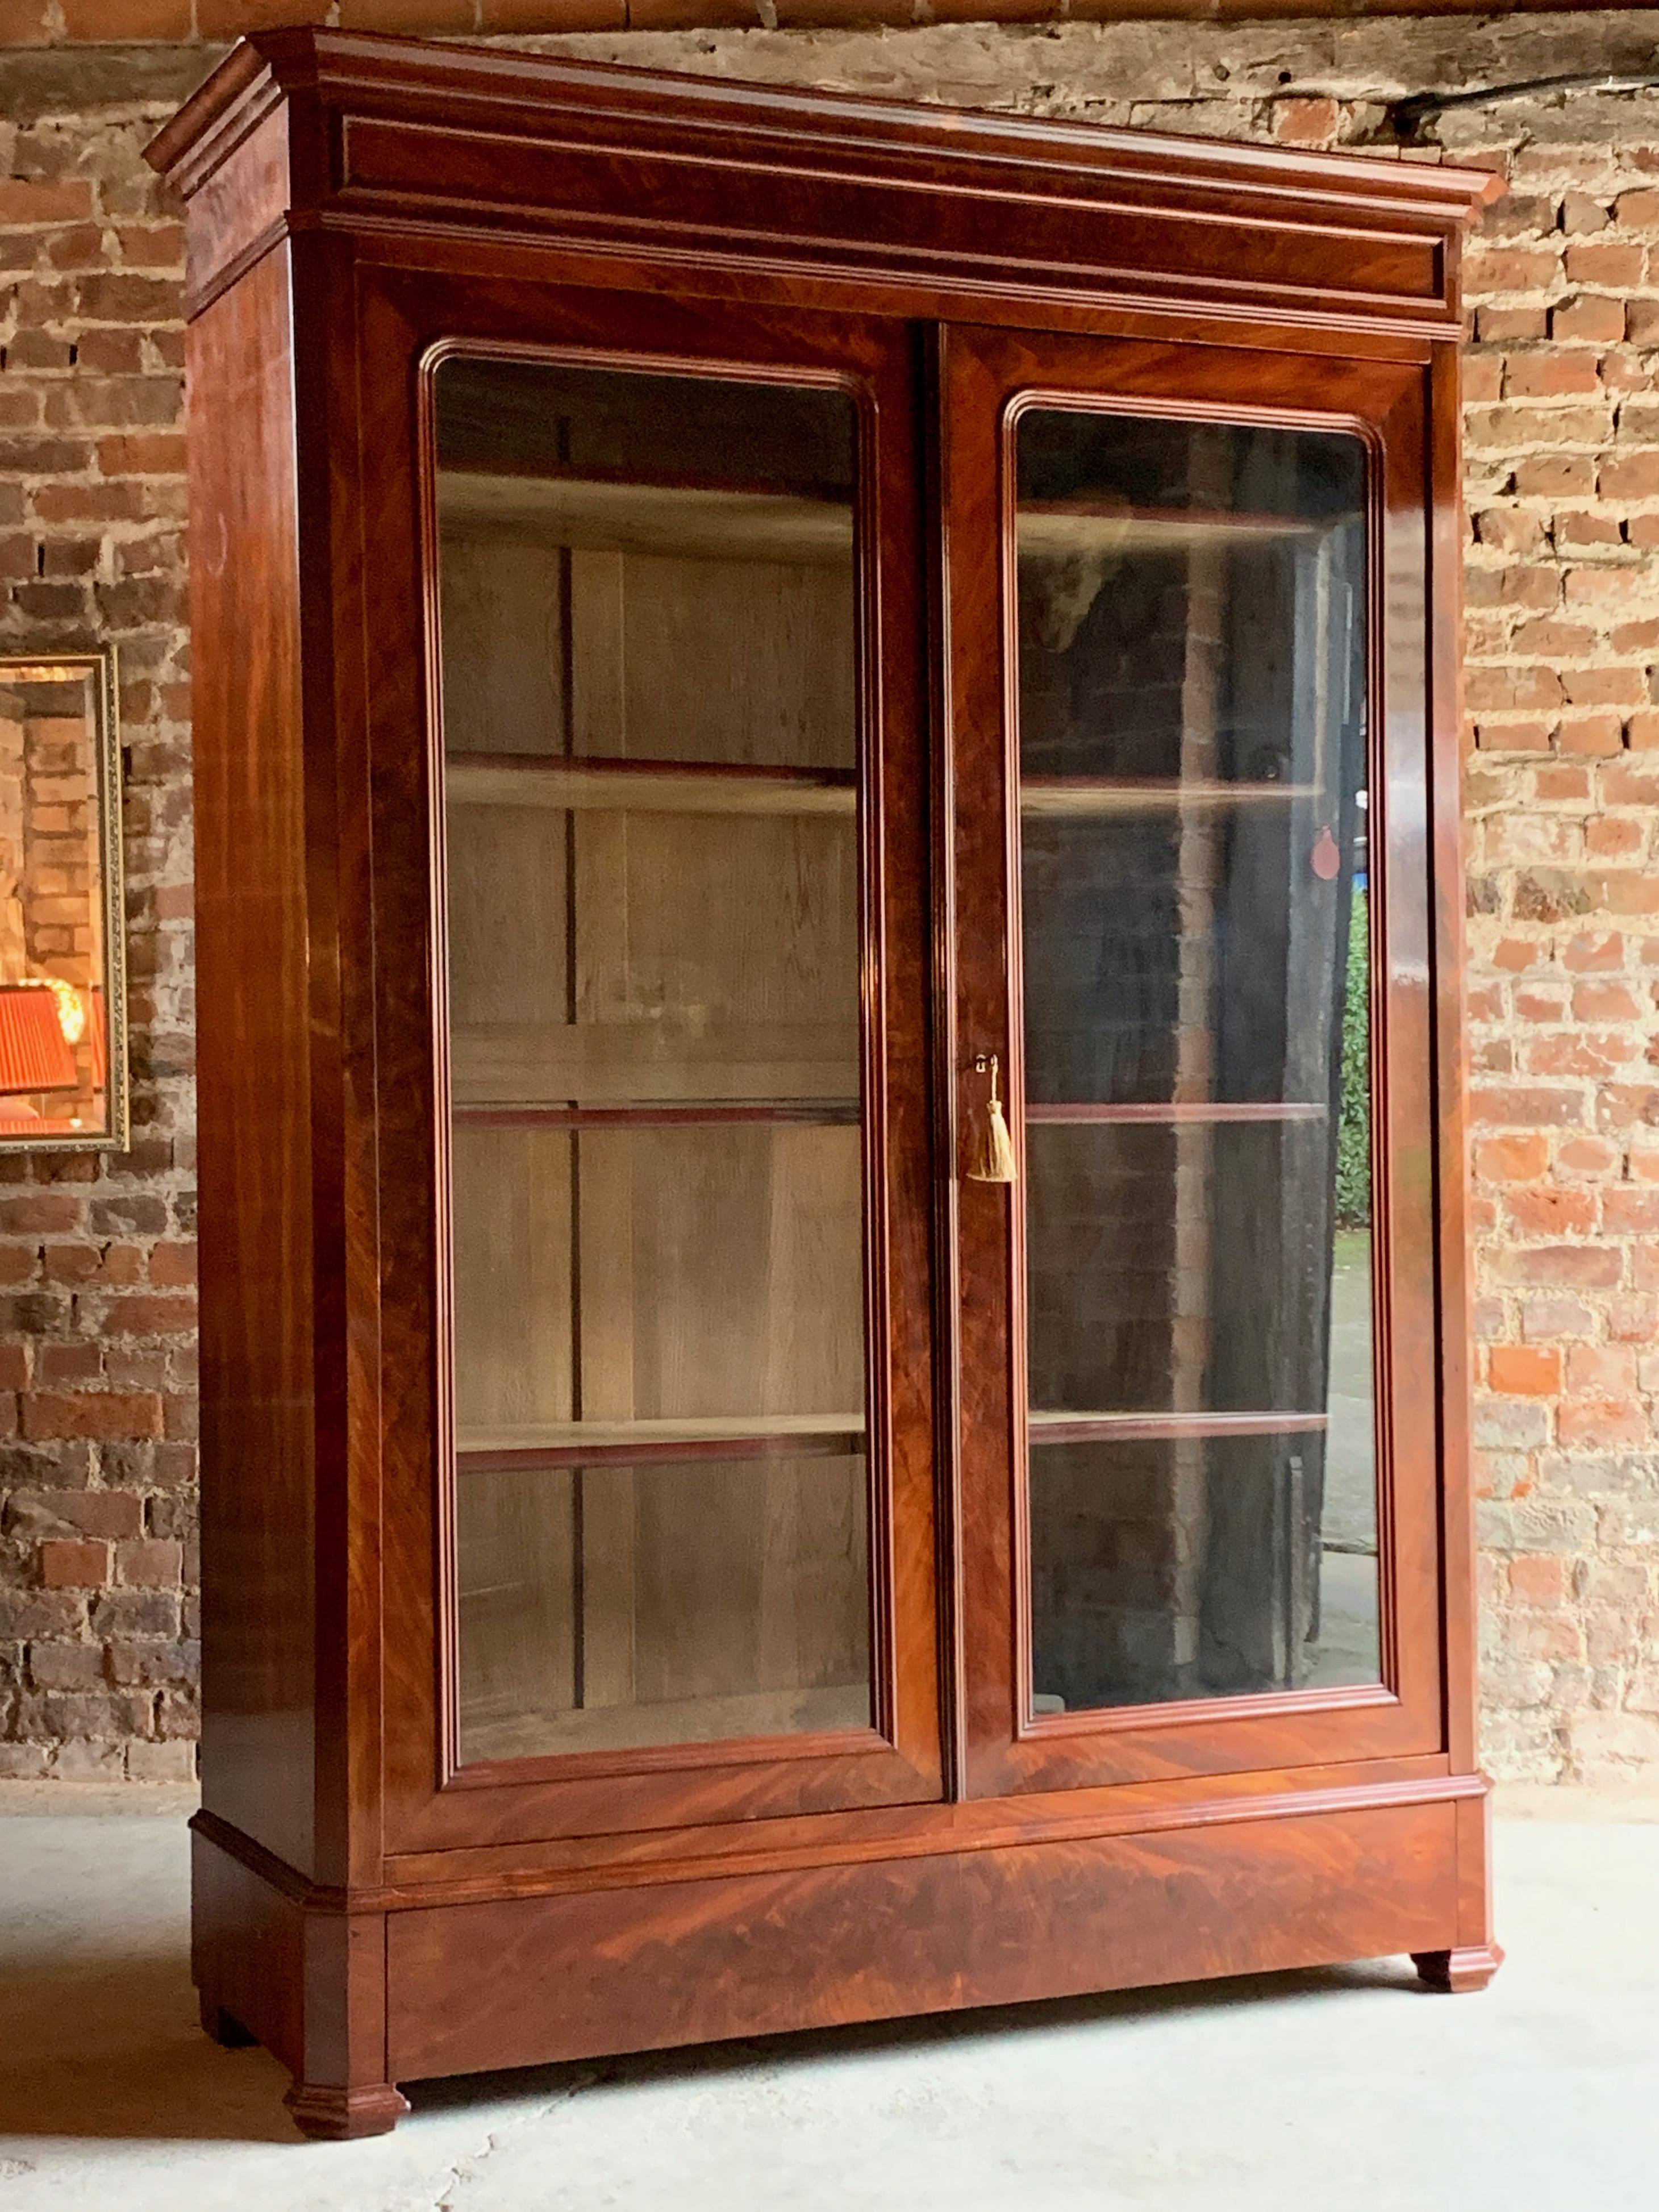 Antique French Bookcase Vitrine Glass Cabinet Mahogany 19th Century 1875 No.2 In Good Condition In Longdon, Tewkesbury